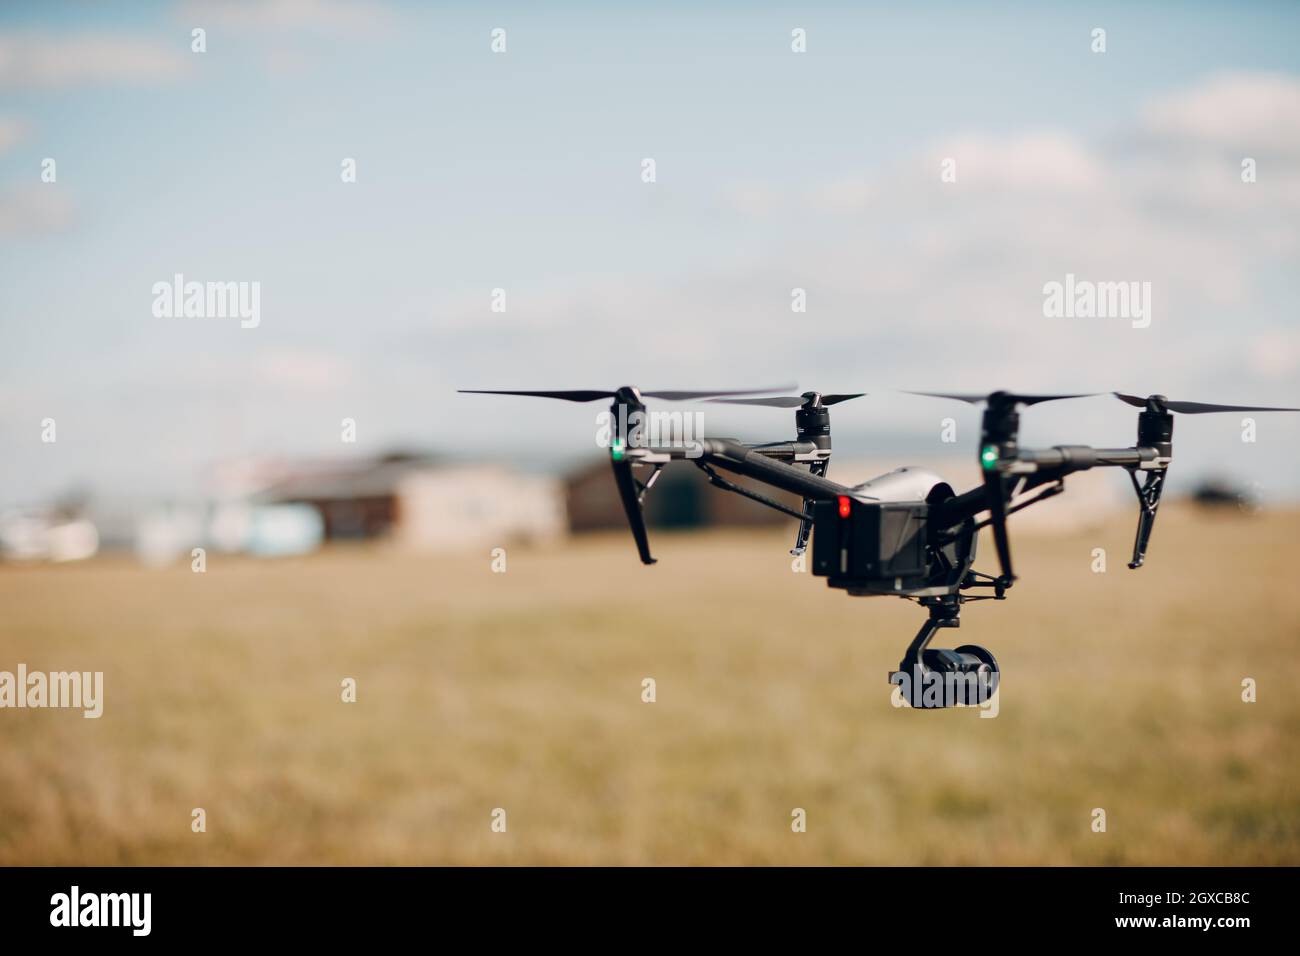 Big quadcopter drone on aerial flight and filming. Stock Photo